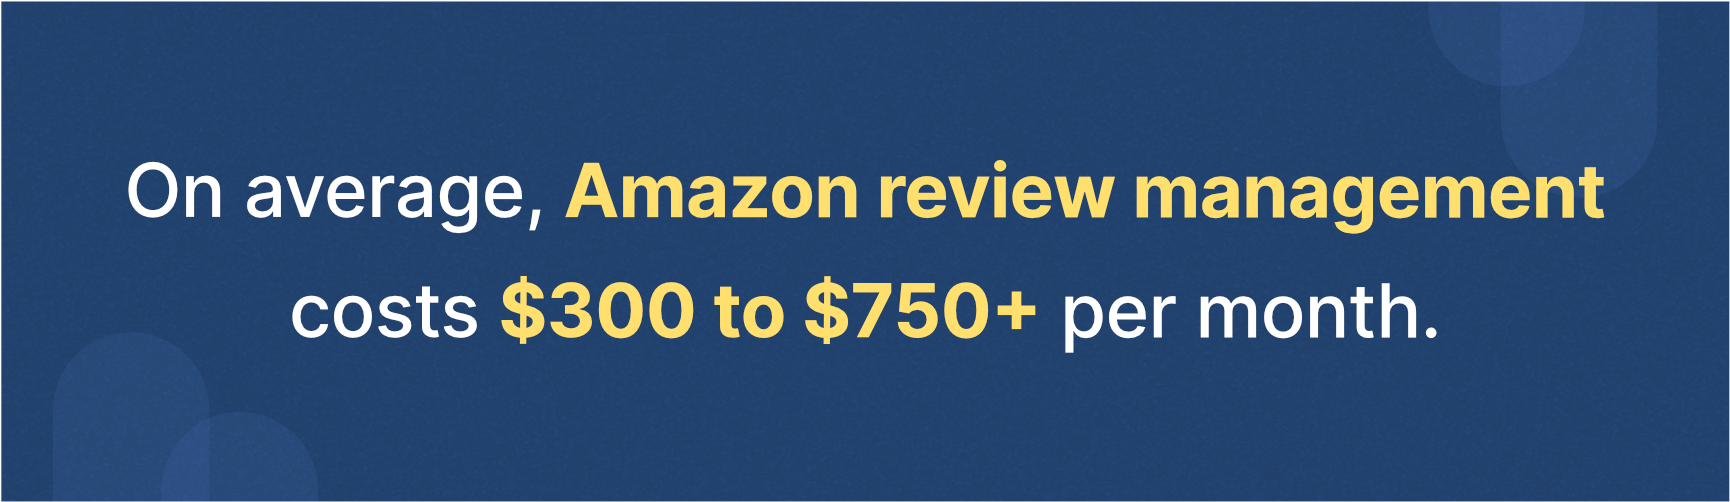 average Amazon review management costs